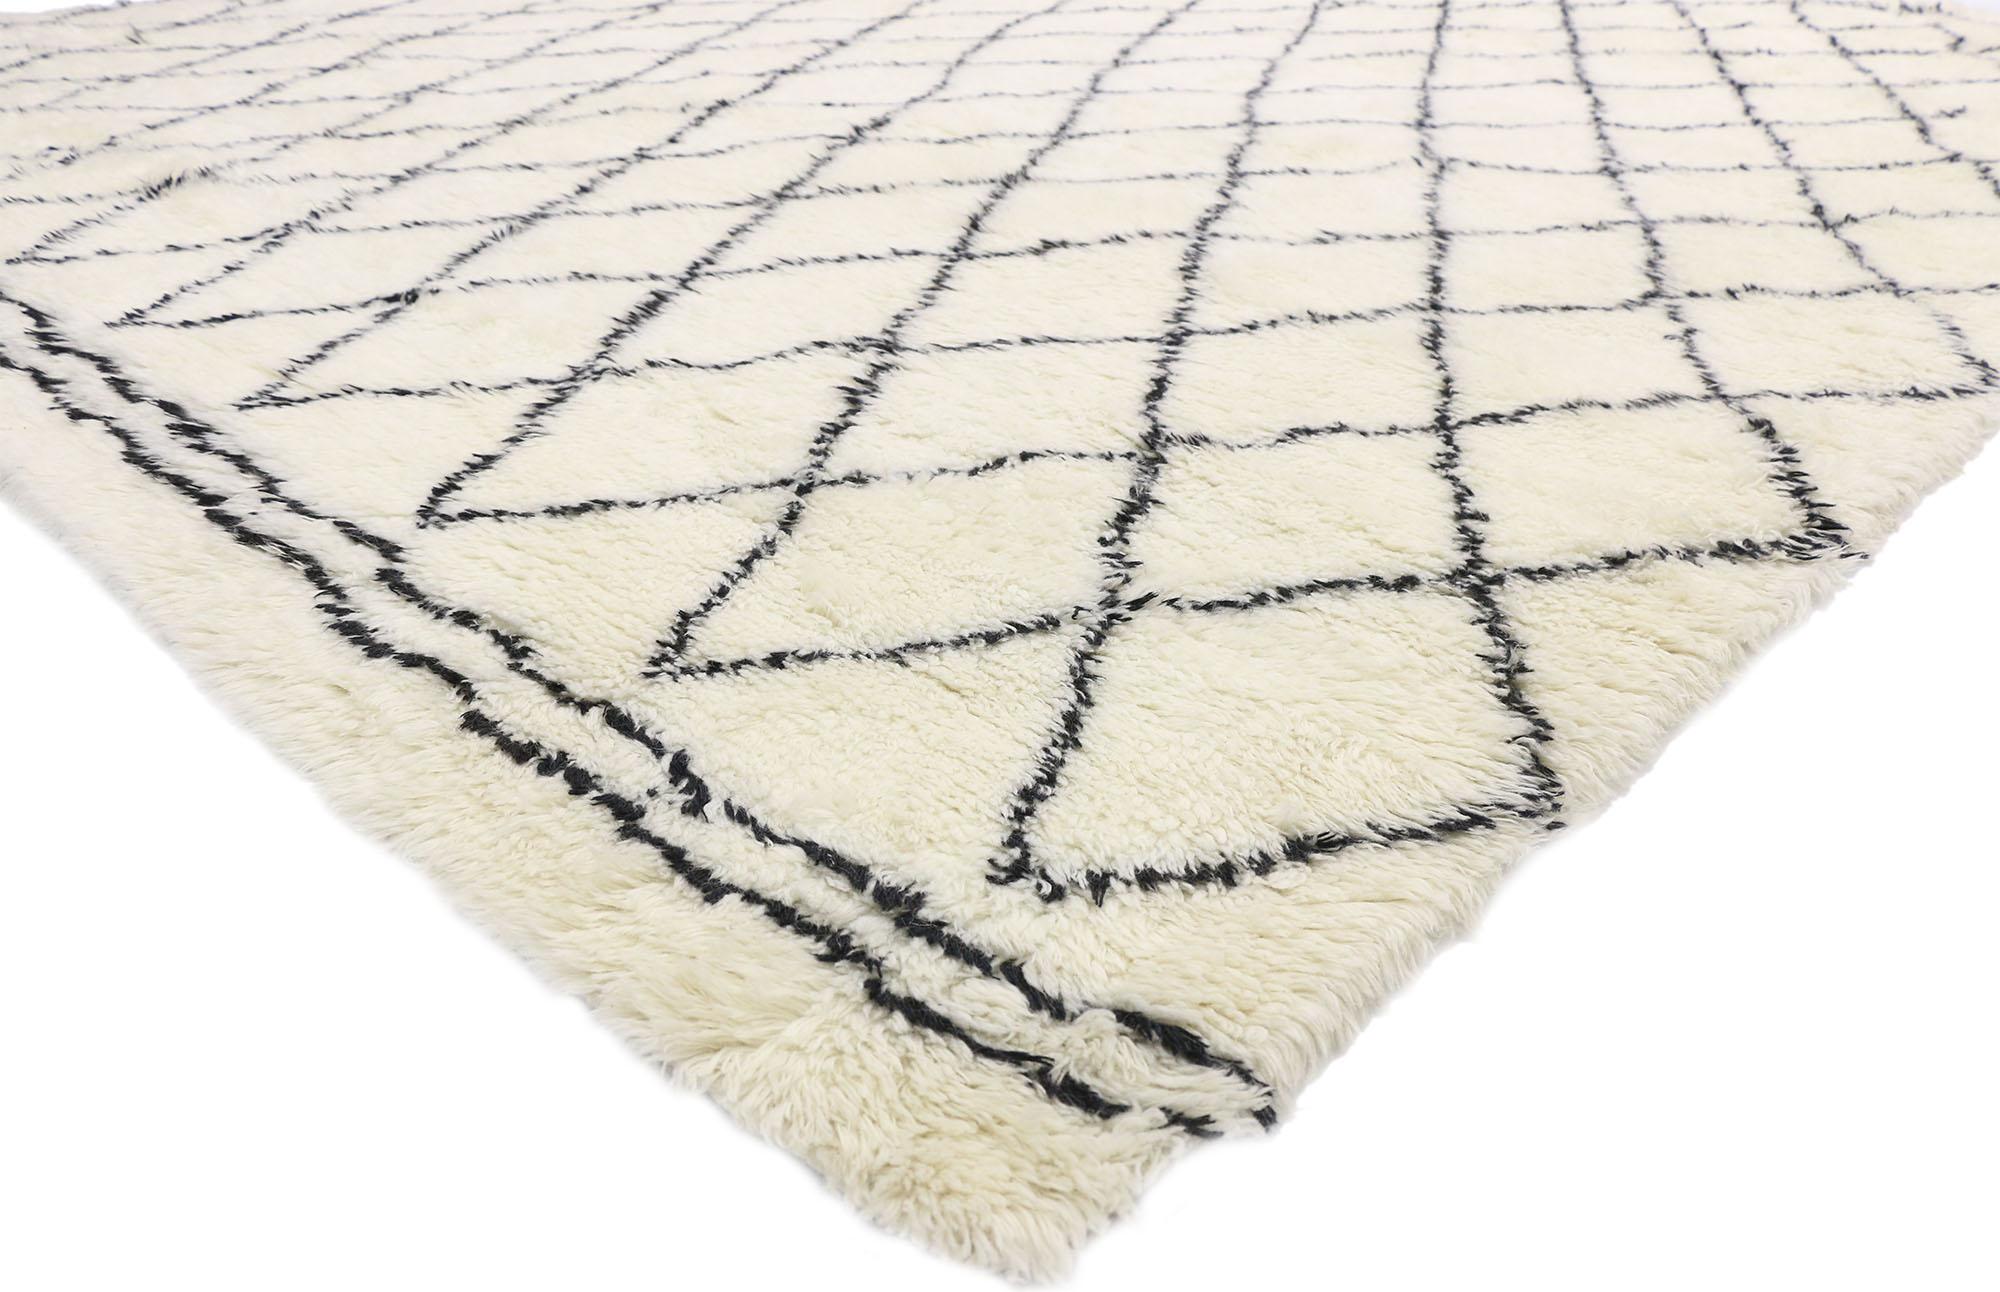 30418 Modern Moroccan Area Rug, 09’03 x 11’11.
With its simplicity and plush pile, this hand knotted wool Moroccan style rug is a captivating vision of woven beauty. The eye-catching diamond trellis and neutral colorway woven into this piece work